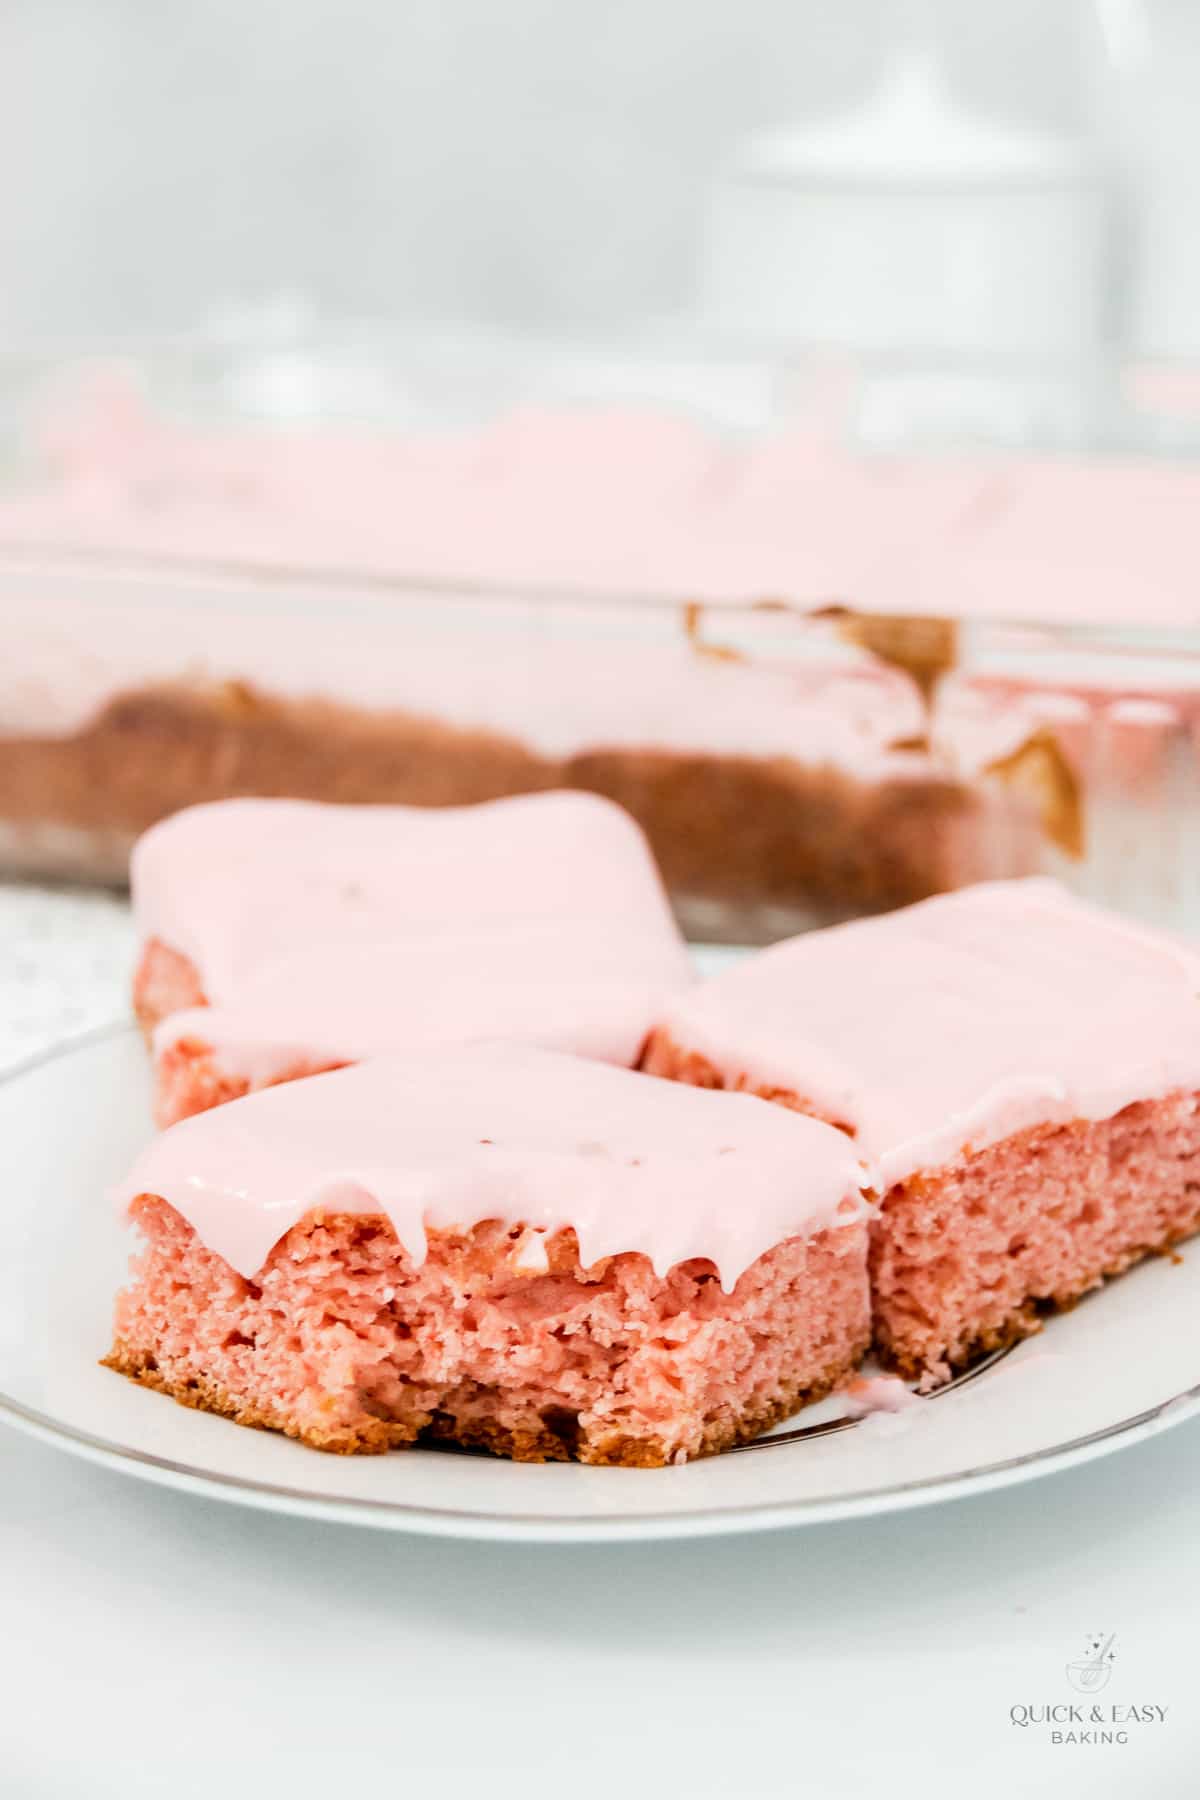 Strawberry cake bars with a bite taken out.